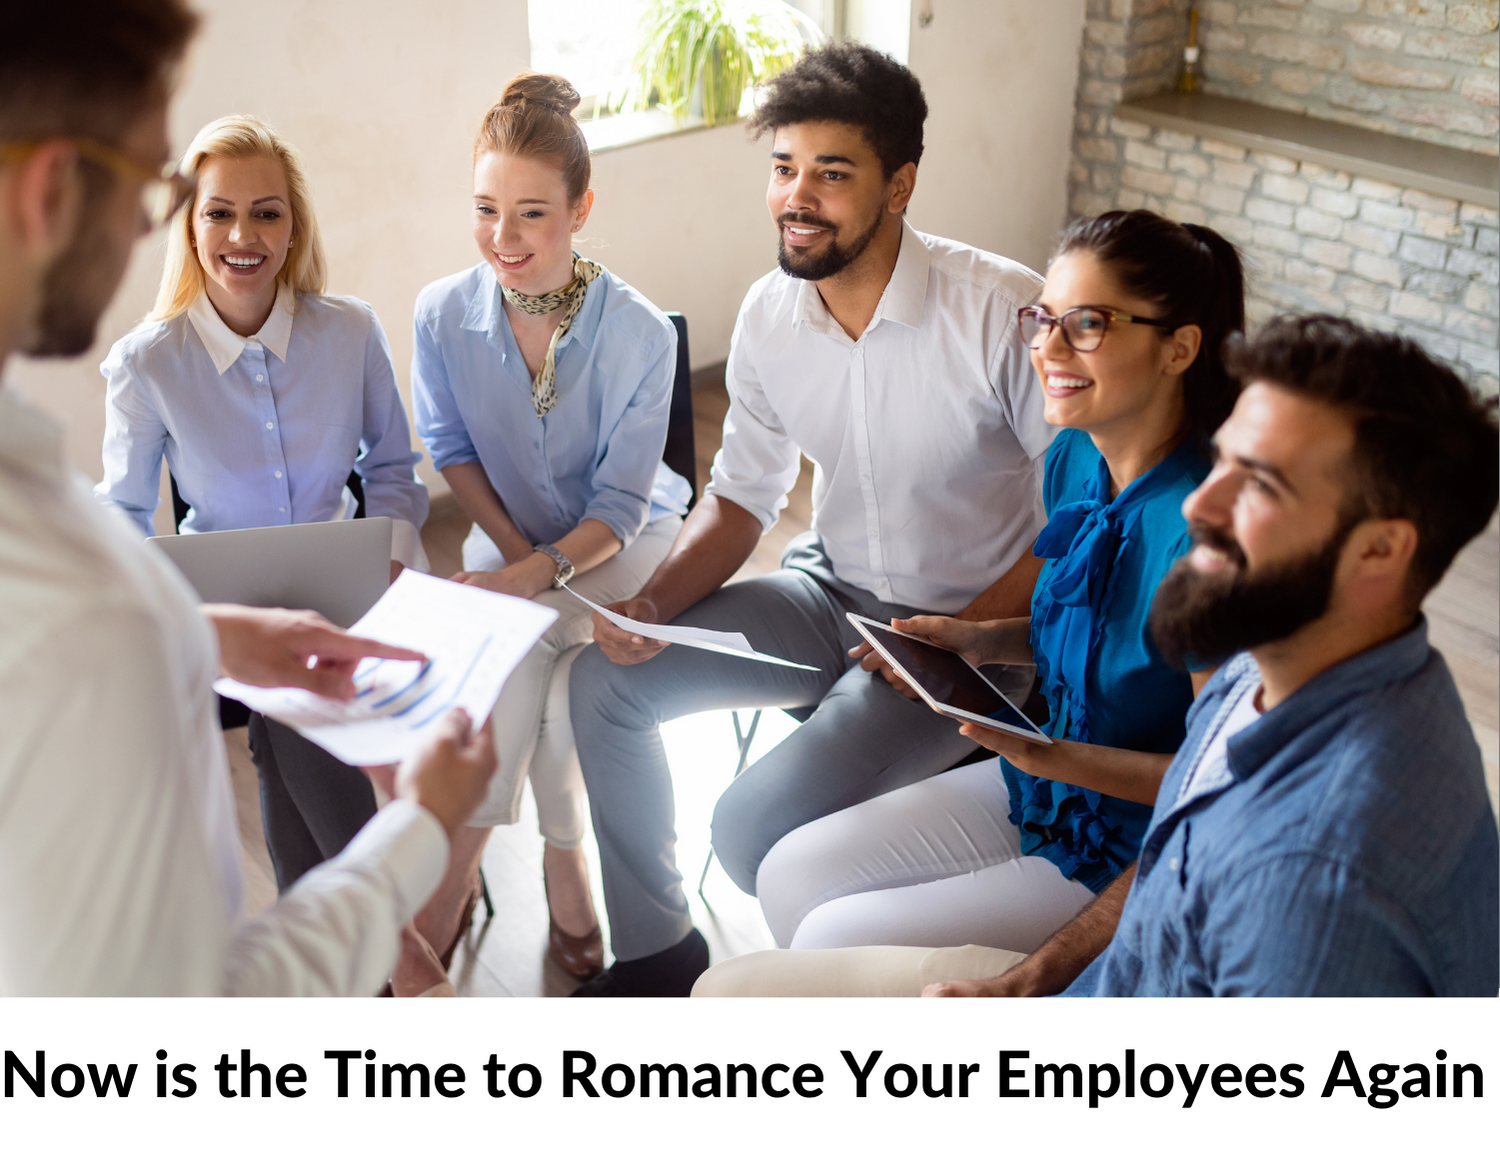 Now is the Time to Romance Your Employees Again